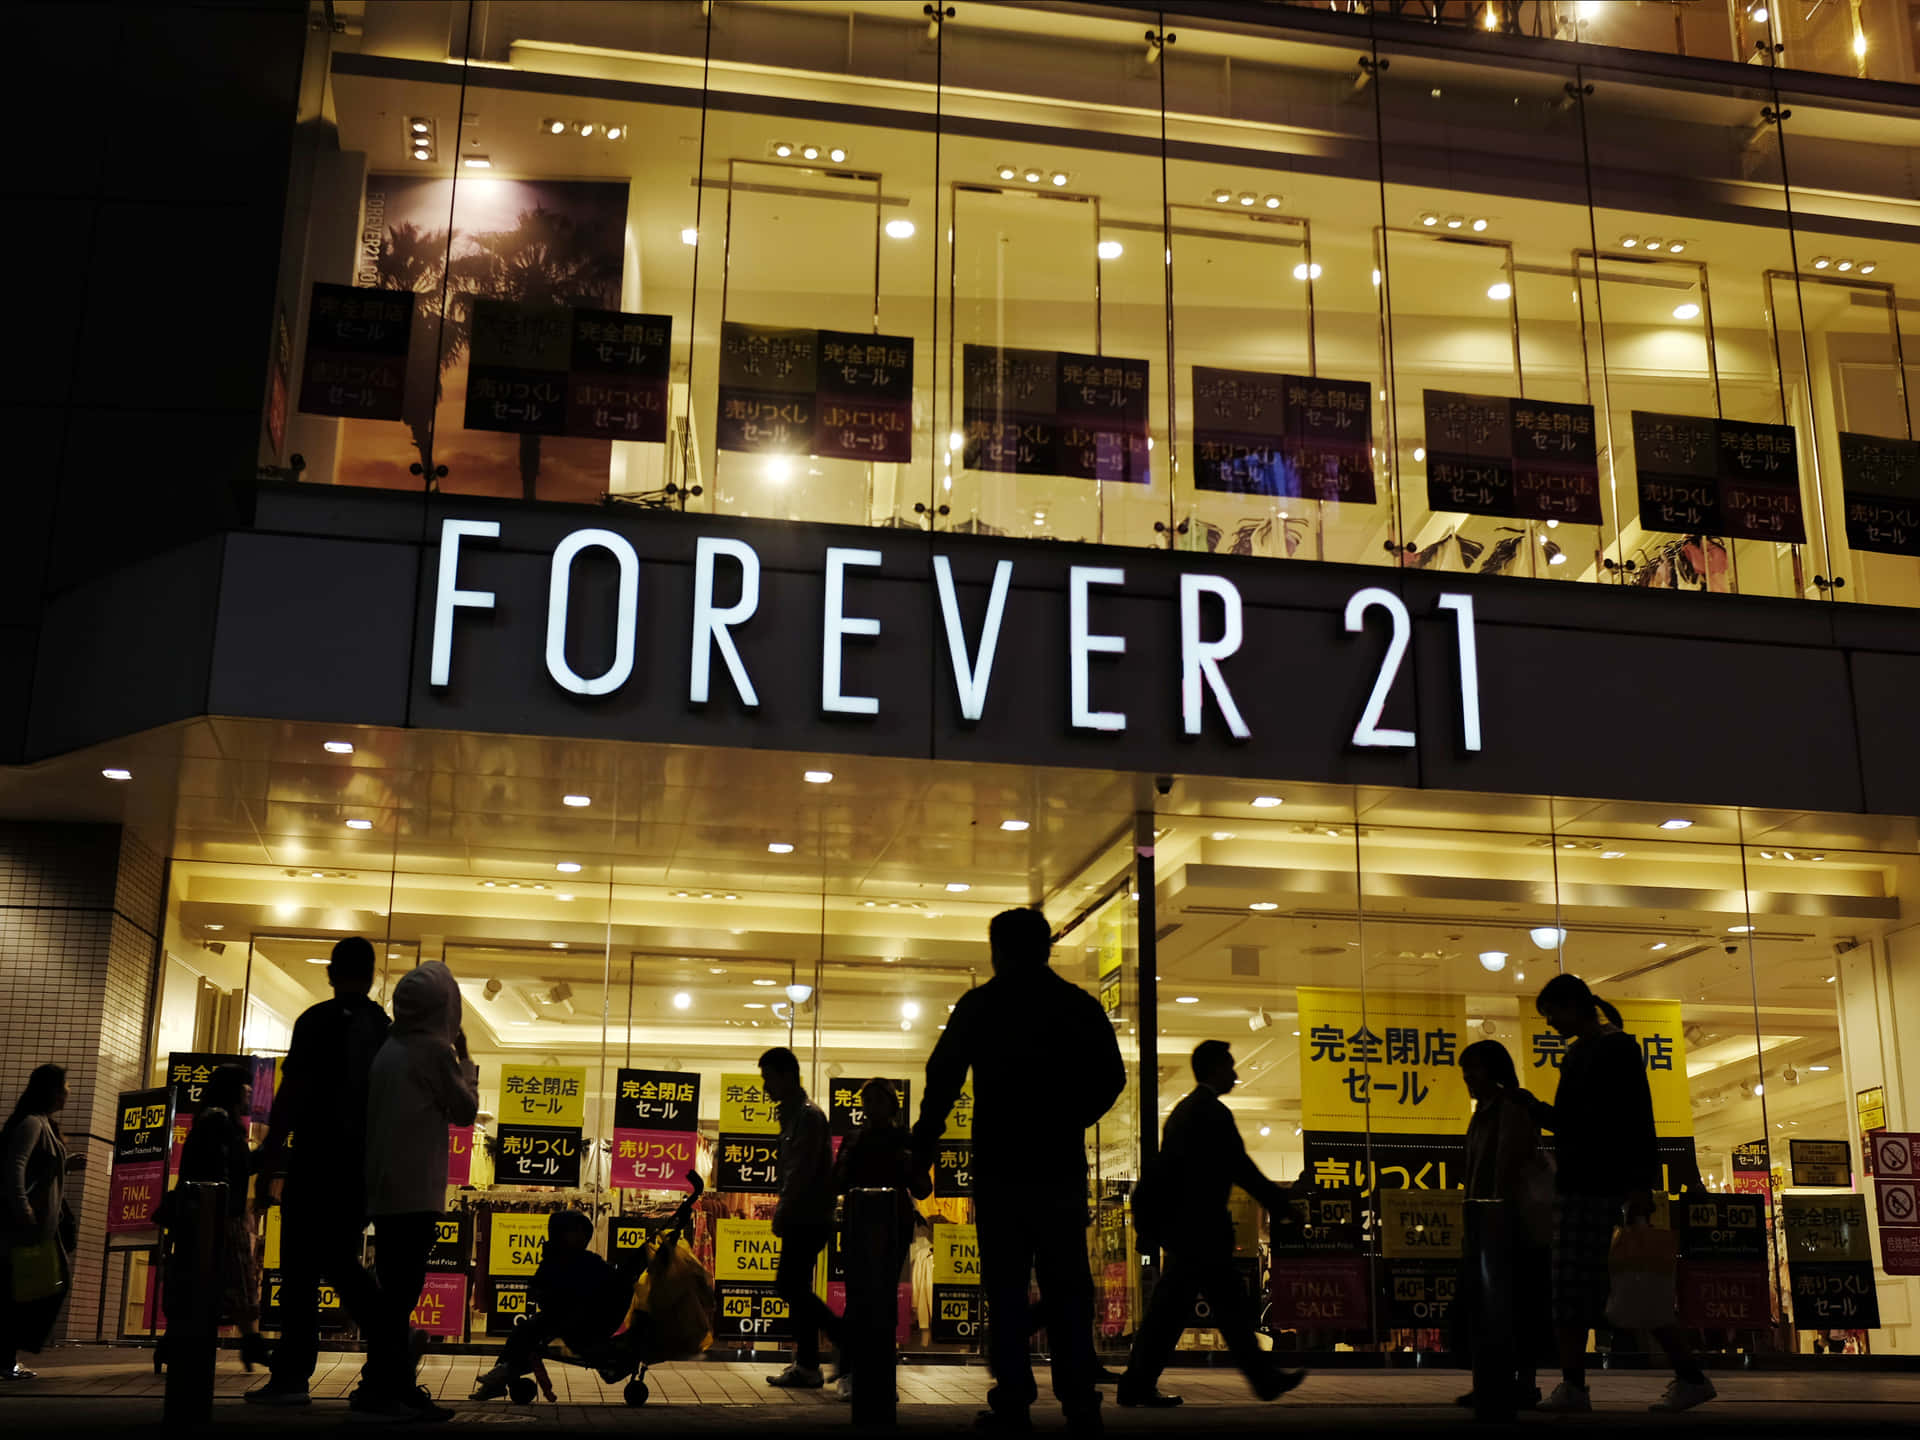 A Group Of People Walking Past A Forever 21 Store At Night